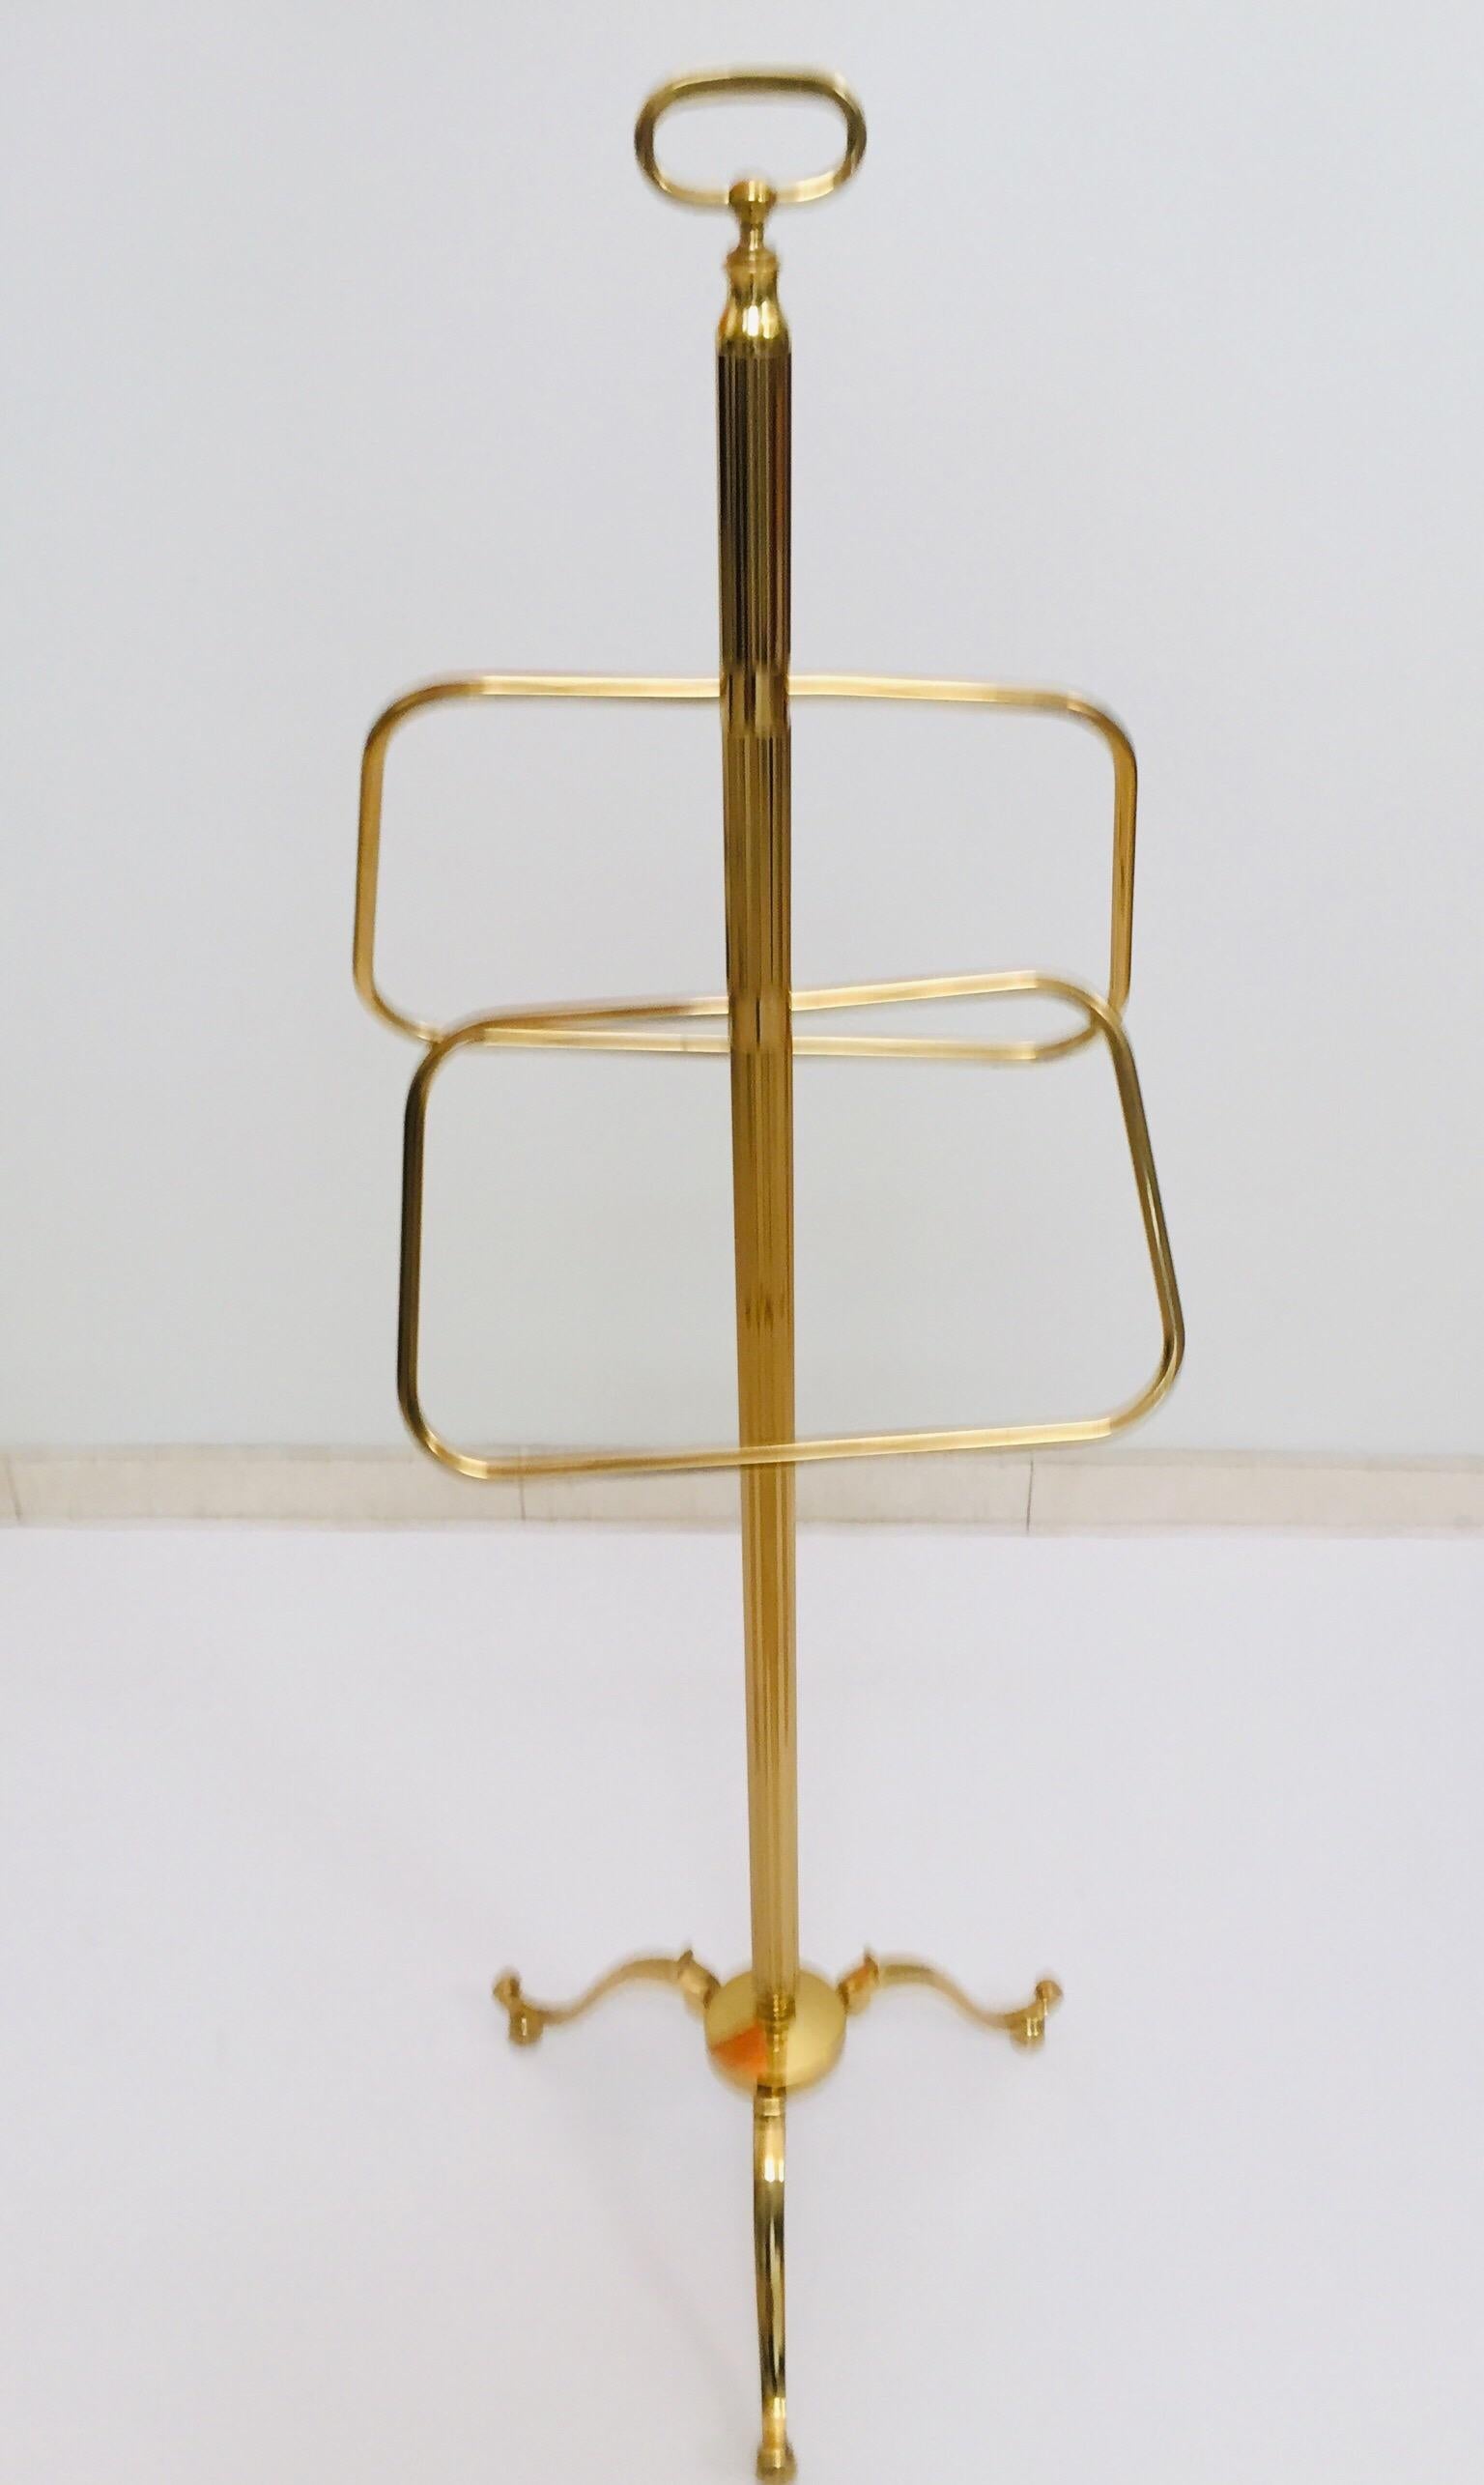 Hollywood Regency Post Modern Polished Brass Valet Stand, Italy 1970 For Sale